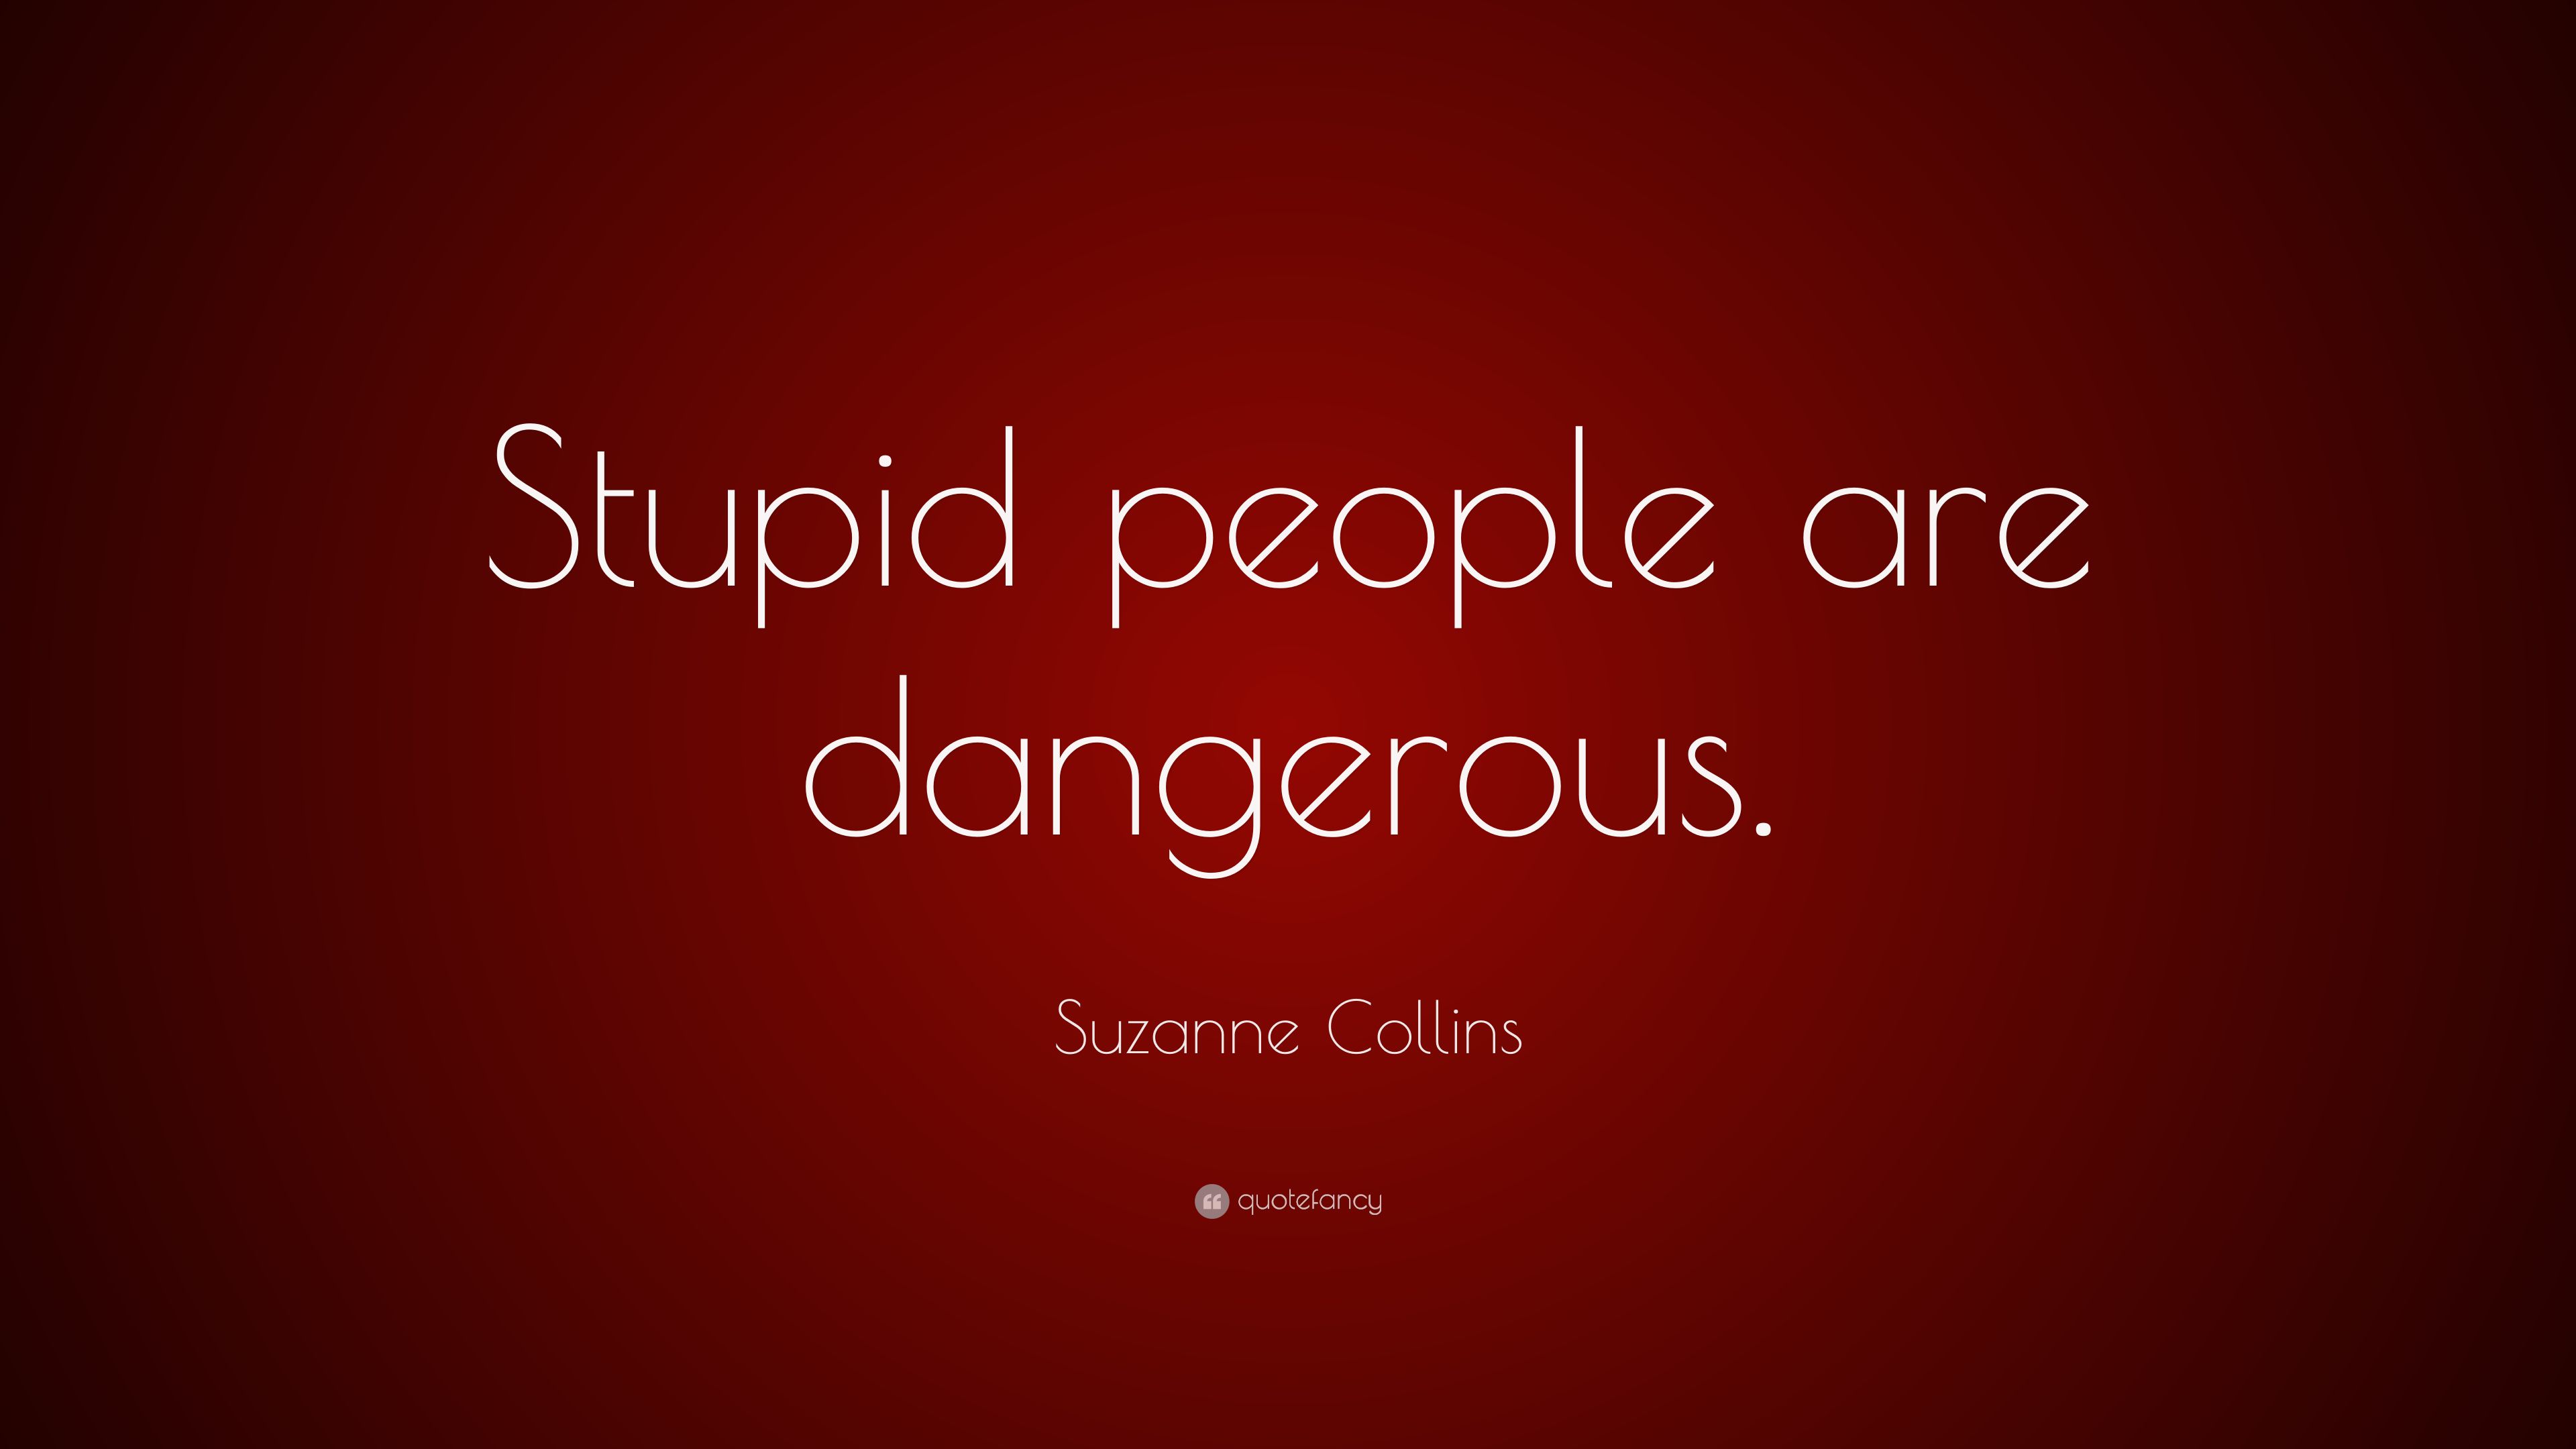 Suzanne Collins Quote: “Stupid people are dangerous.” (6 wallpaper)